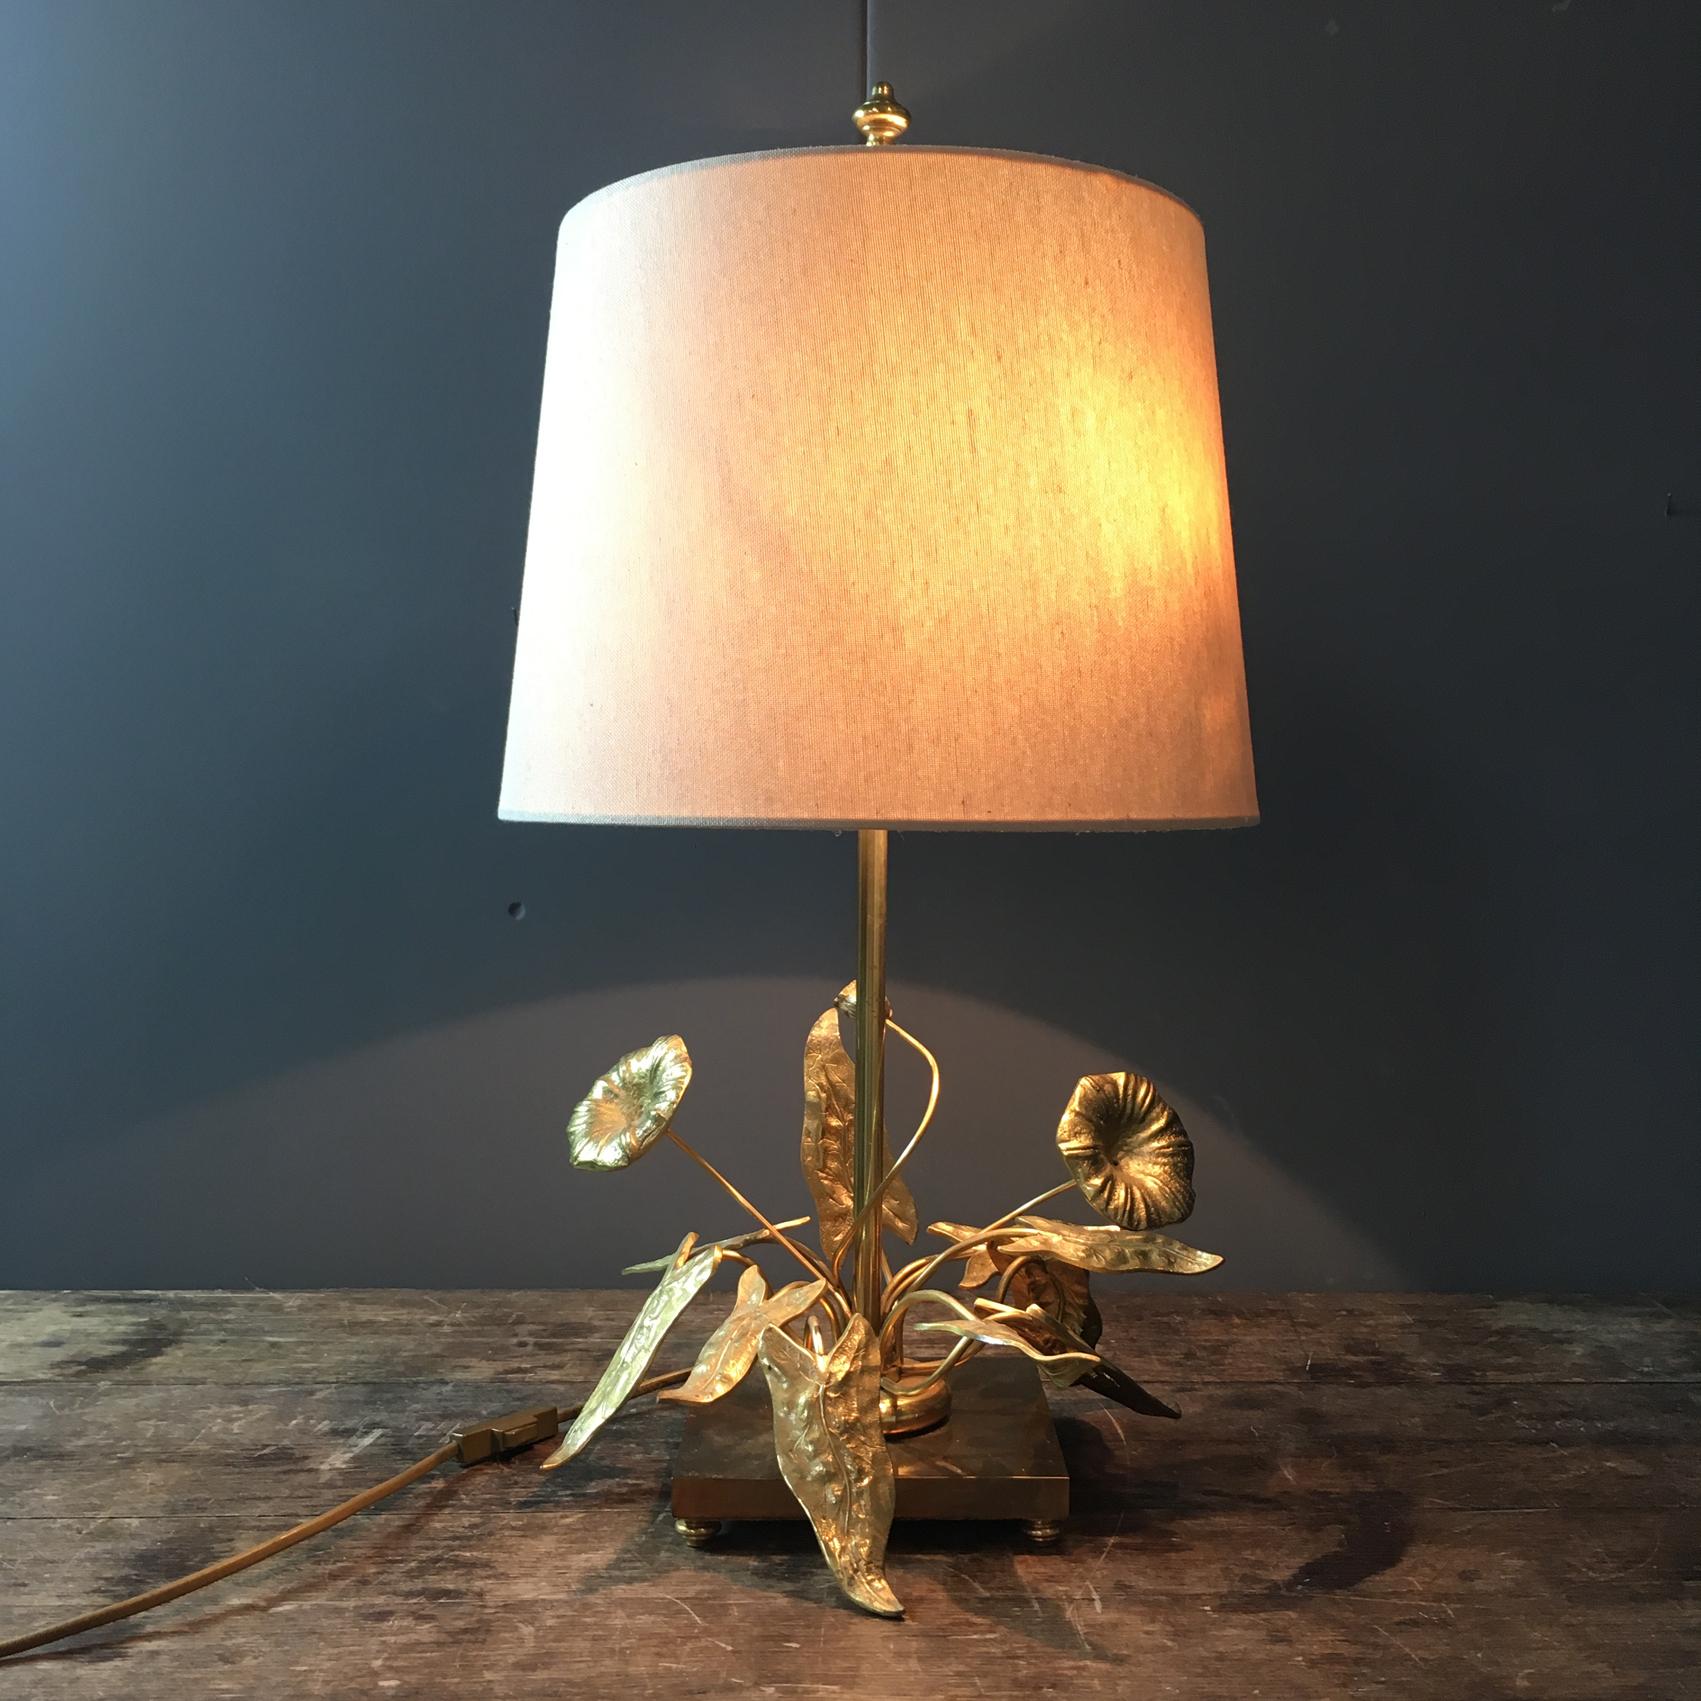 Elegant table lamp from Maison Charles in bronze and gilded brass decorated with flowers and foliage, all placed on a square base.

circa 1960s

The shade is a modern replacement

The lead has the original gold rocker switch

The light